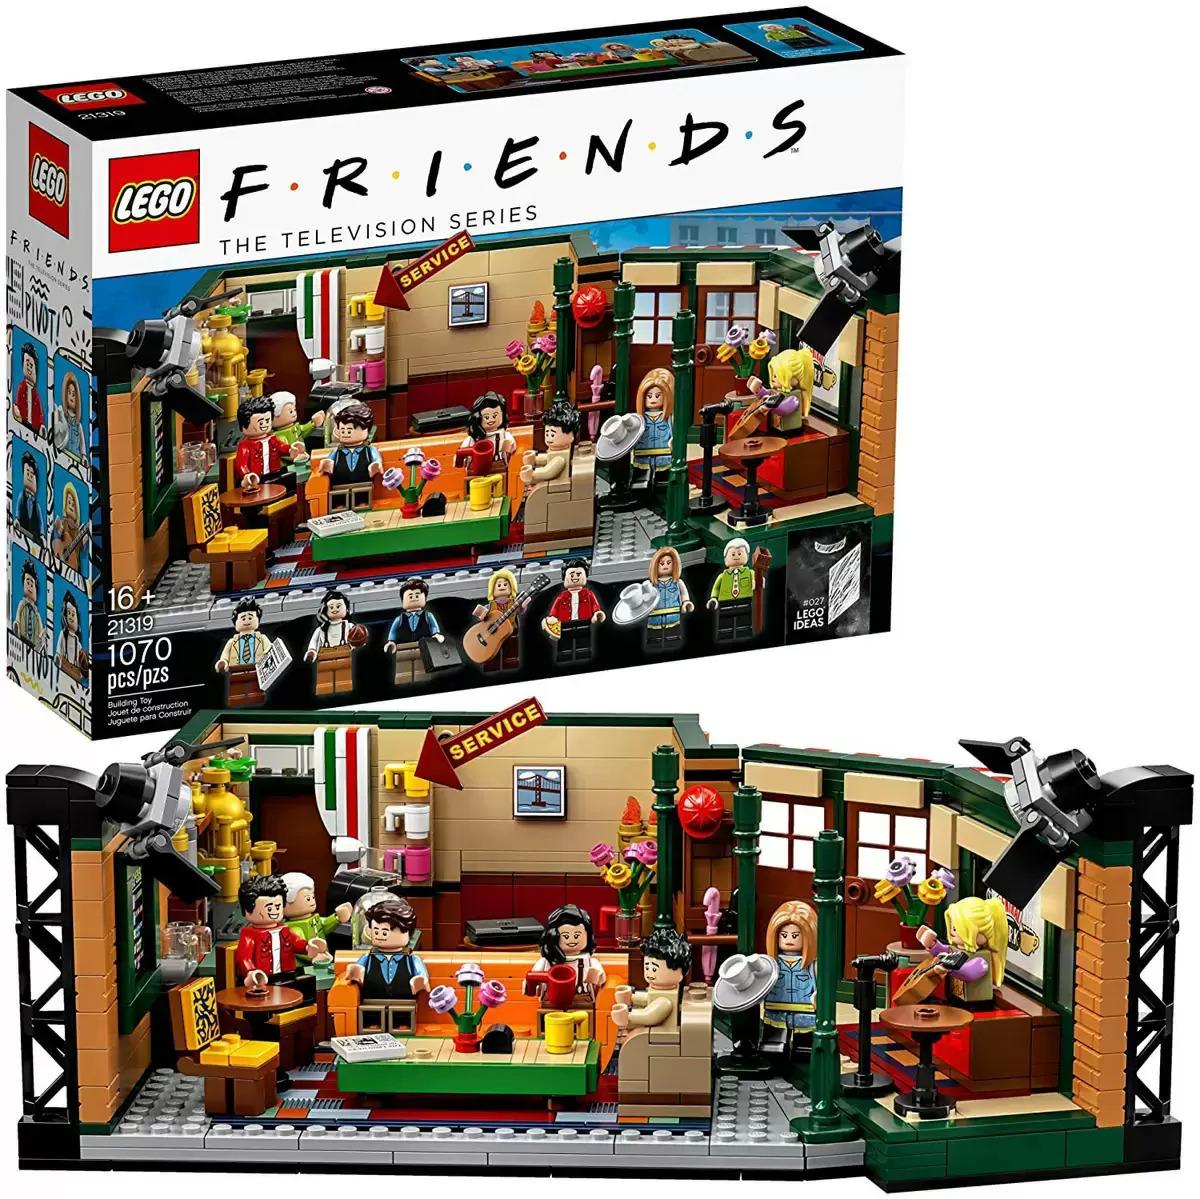 Lego Friends Ideas 21319 Central Perk Building Kit for $48 Shipped